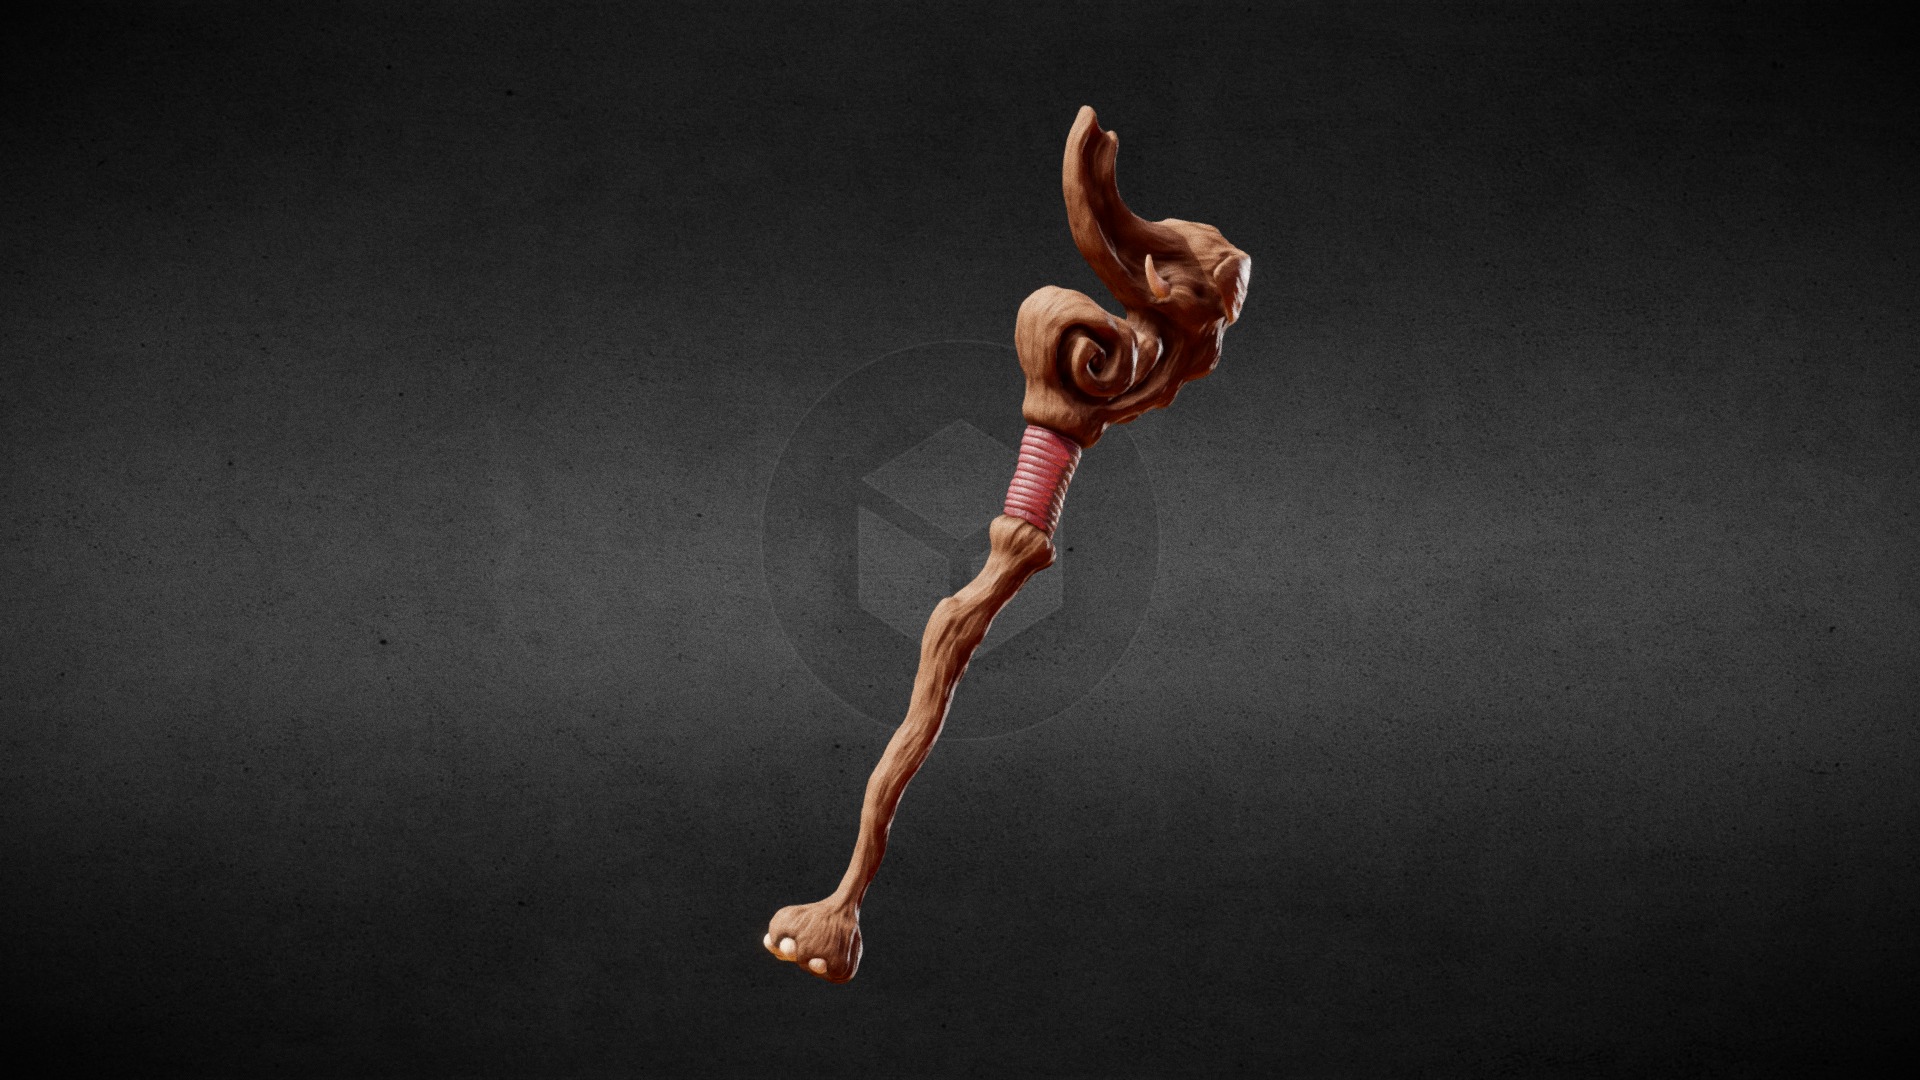 3D model SculptJanuary19 Day12: Object – Staff - This is a 3D model of the SculptJanuary19 Day12: Object - Staff. The 3D model is about a person in a pose for the camera.